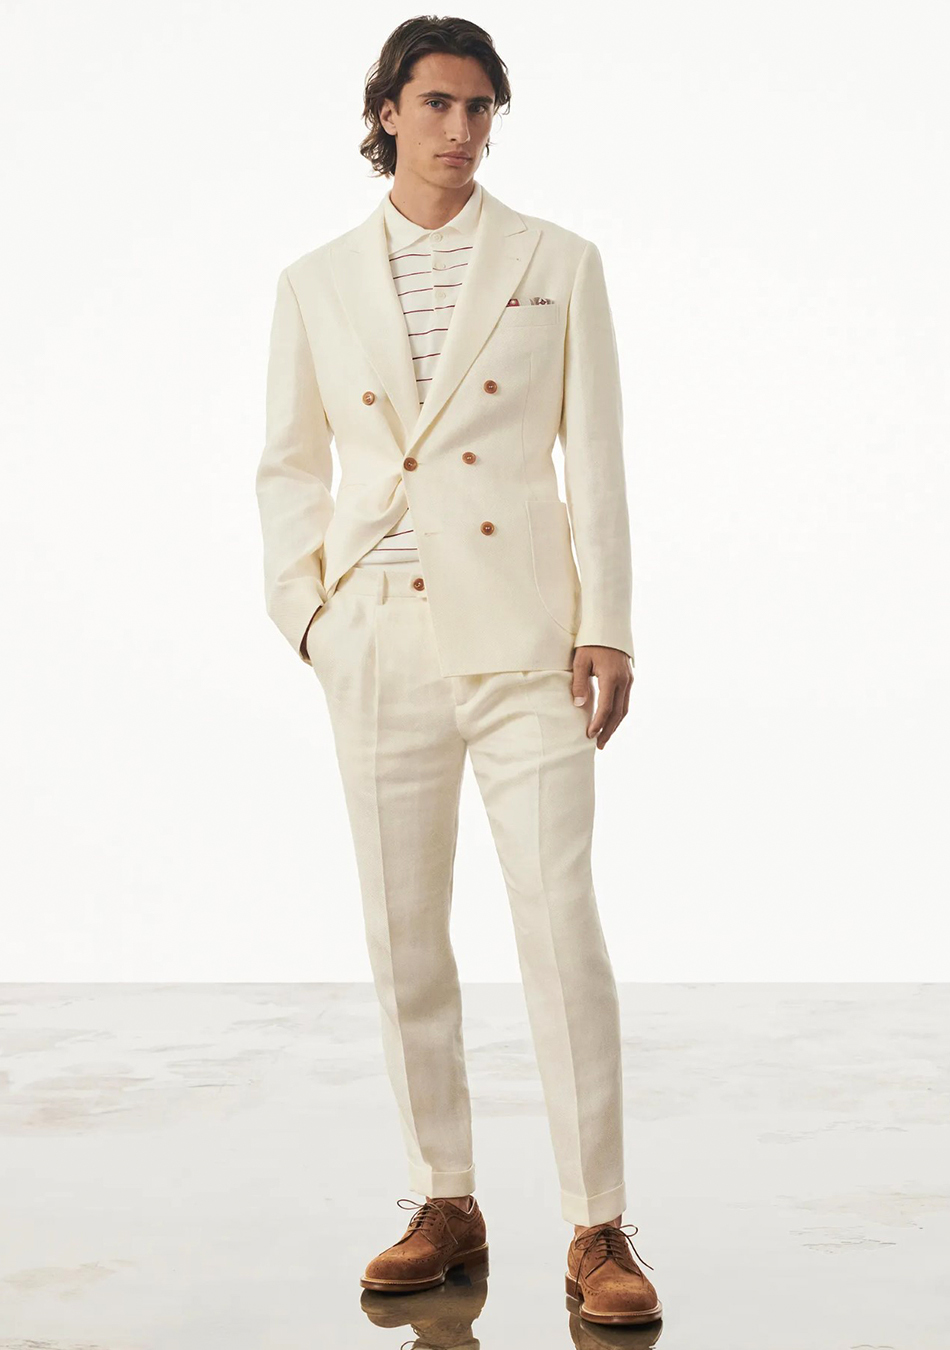 Beige double-breasted suit, white striped polo t-shirt, and brown brogues